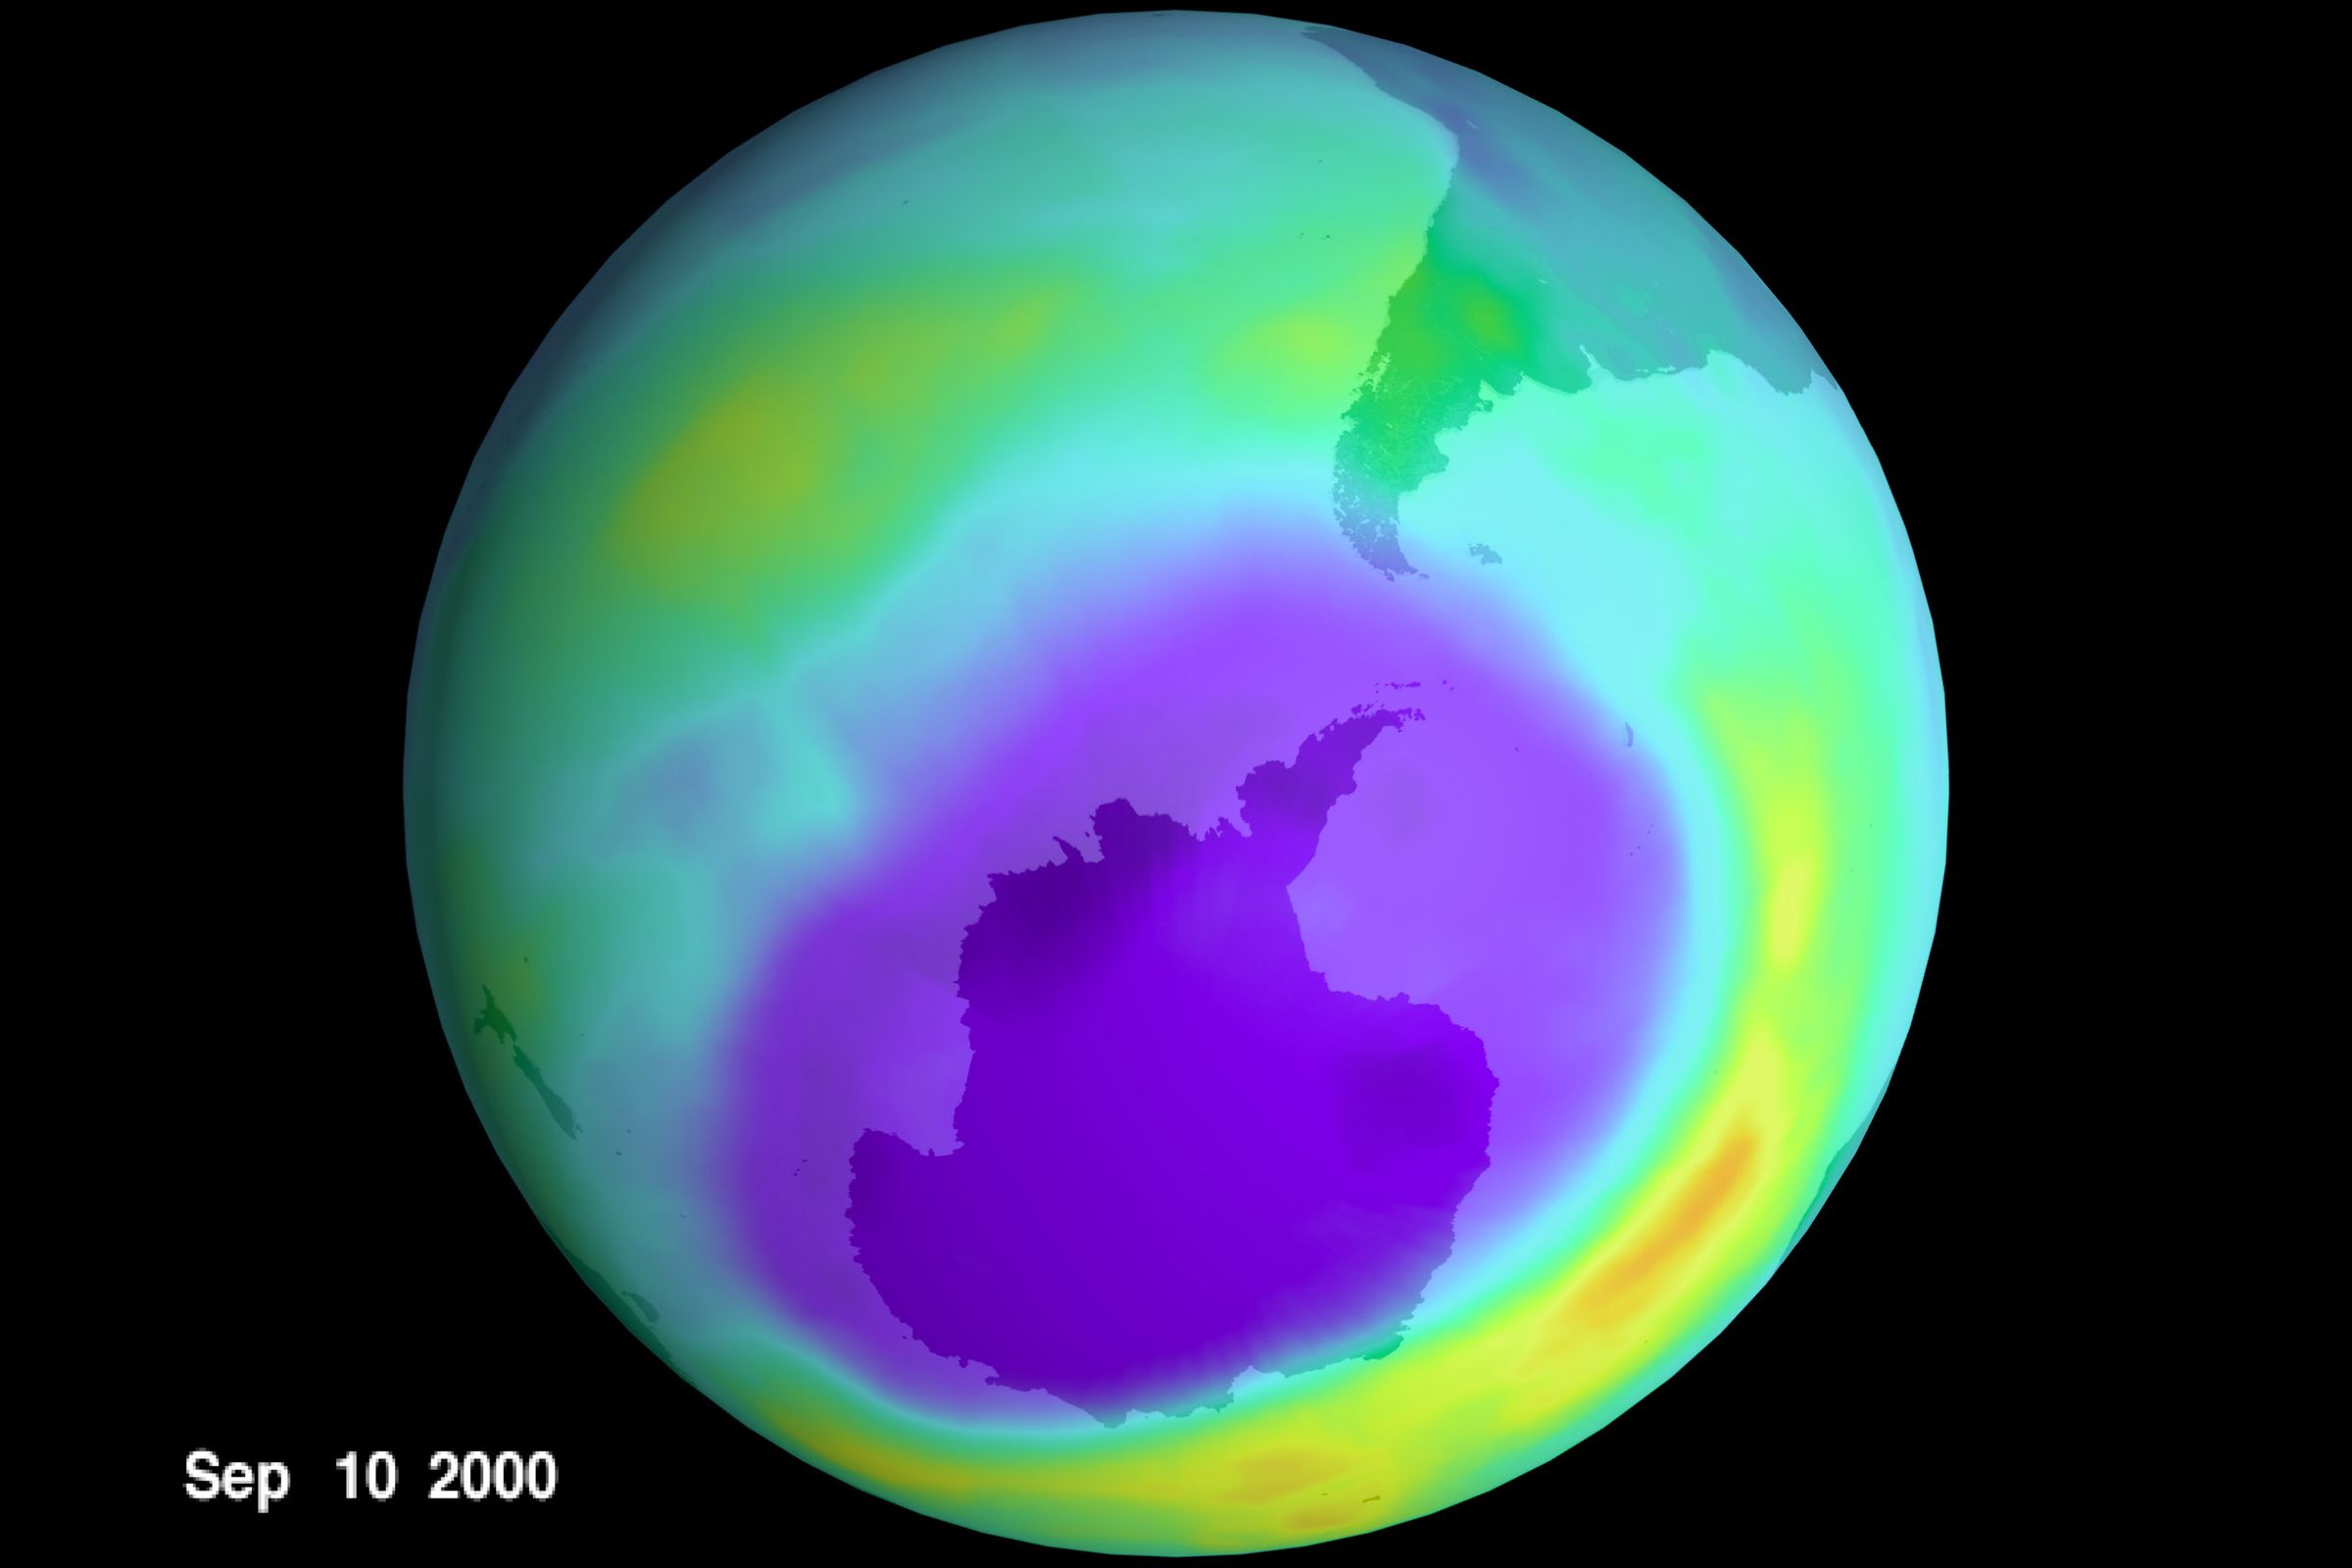 A rendering of a massive hole in the ozone layer over Antarctica. The hole is depicted purple, while a green layer covers the rest of the planet.